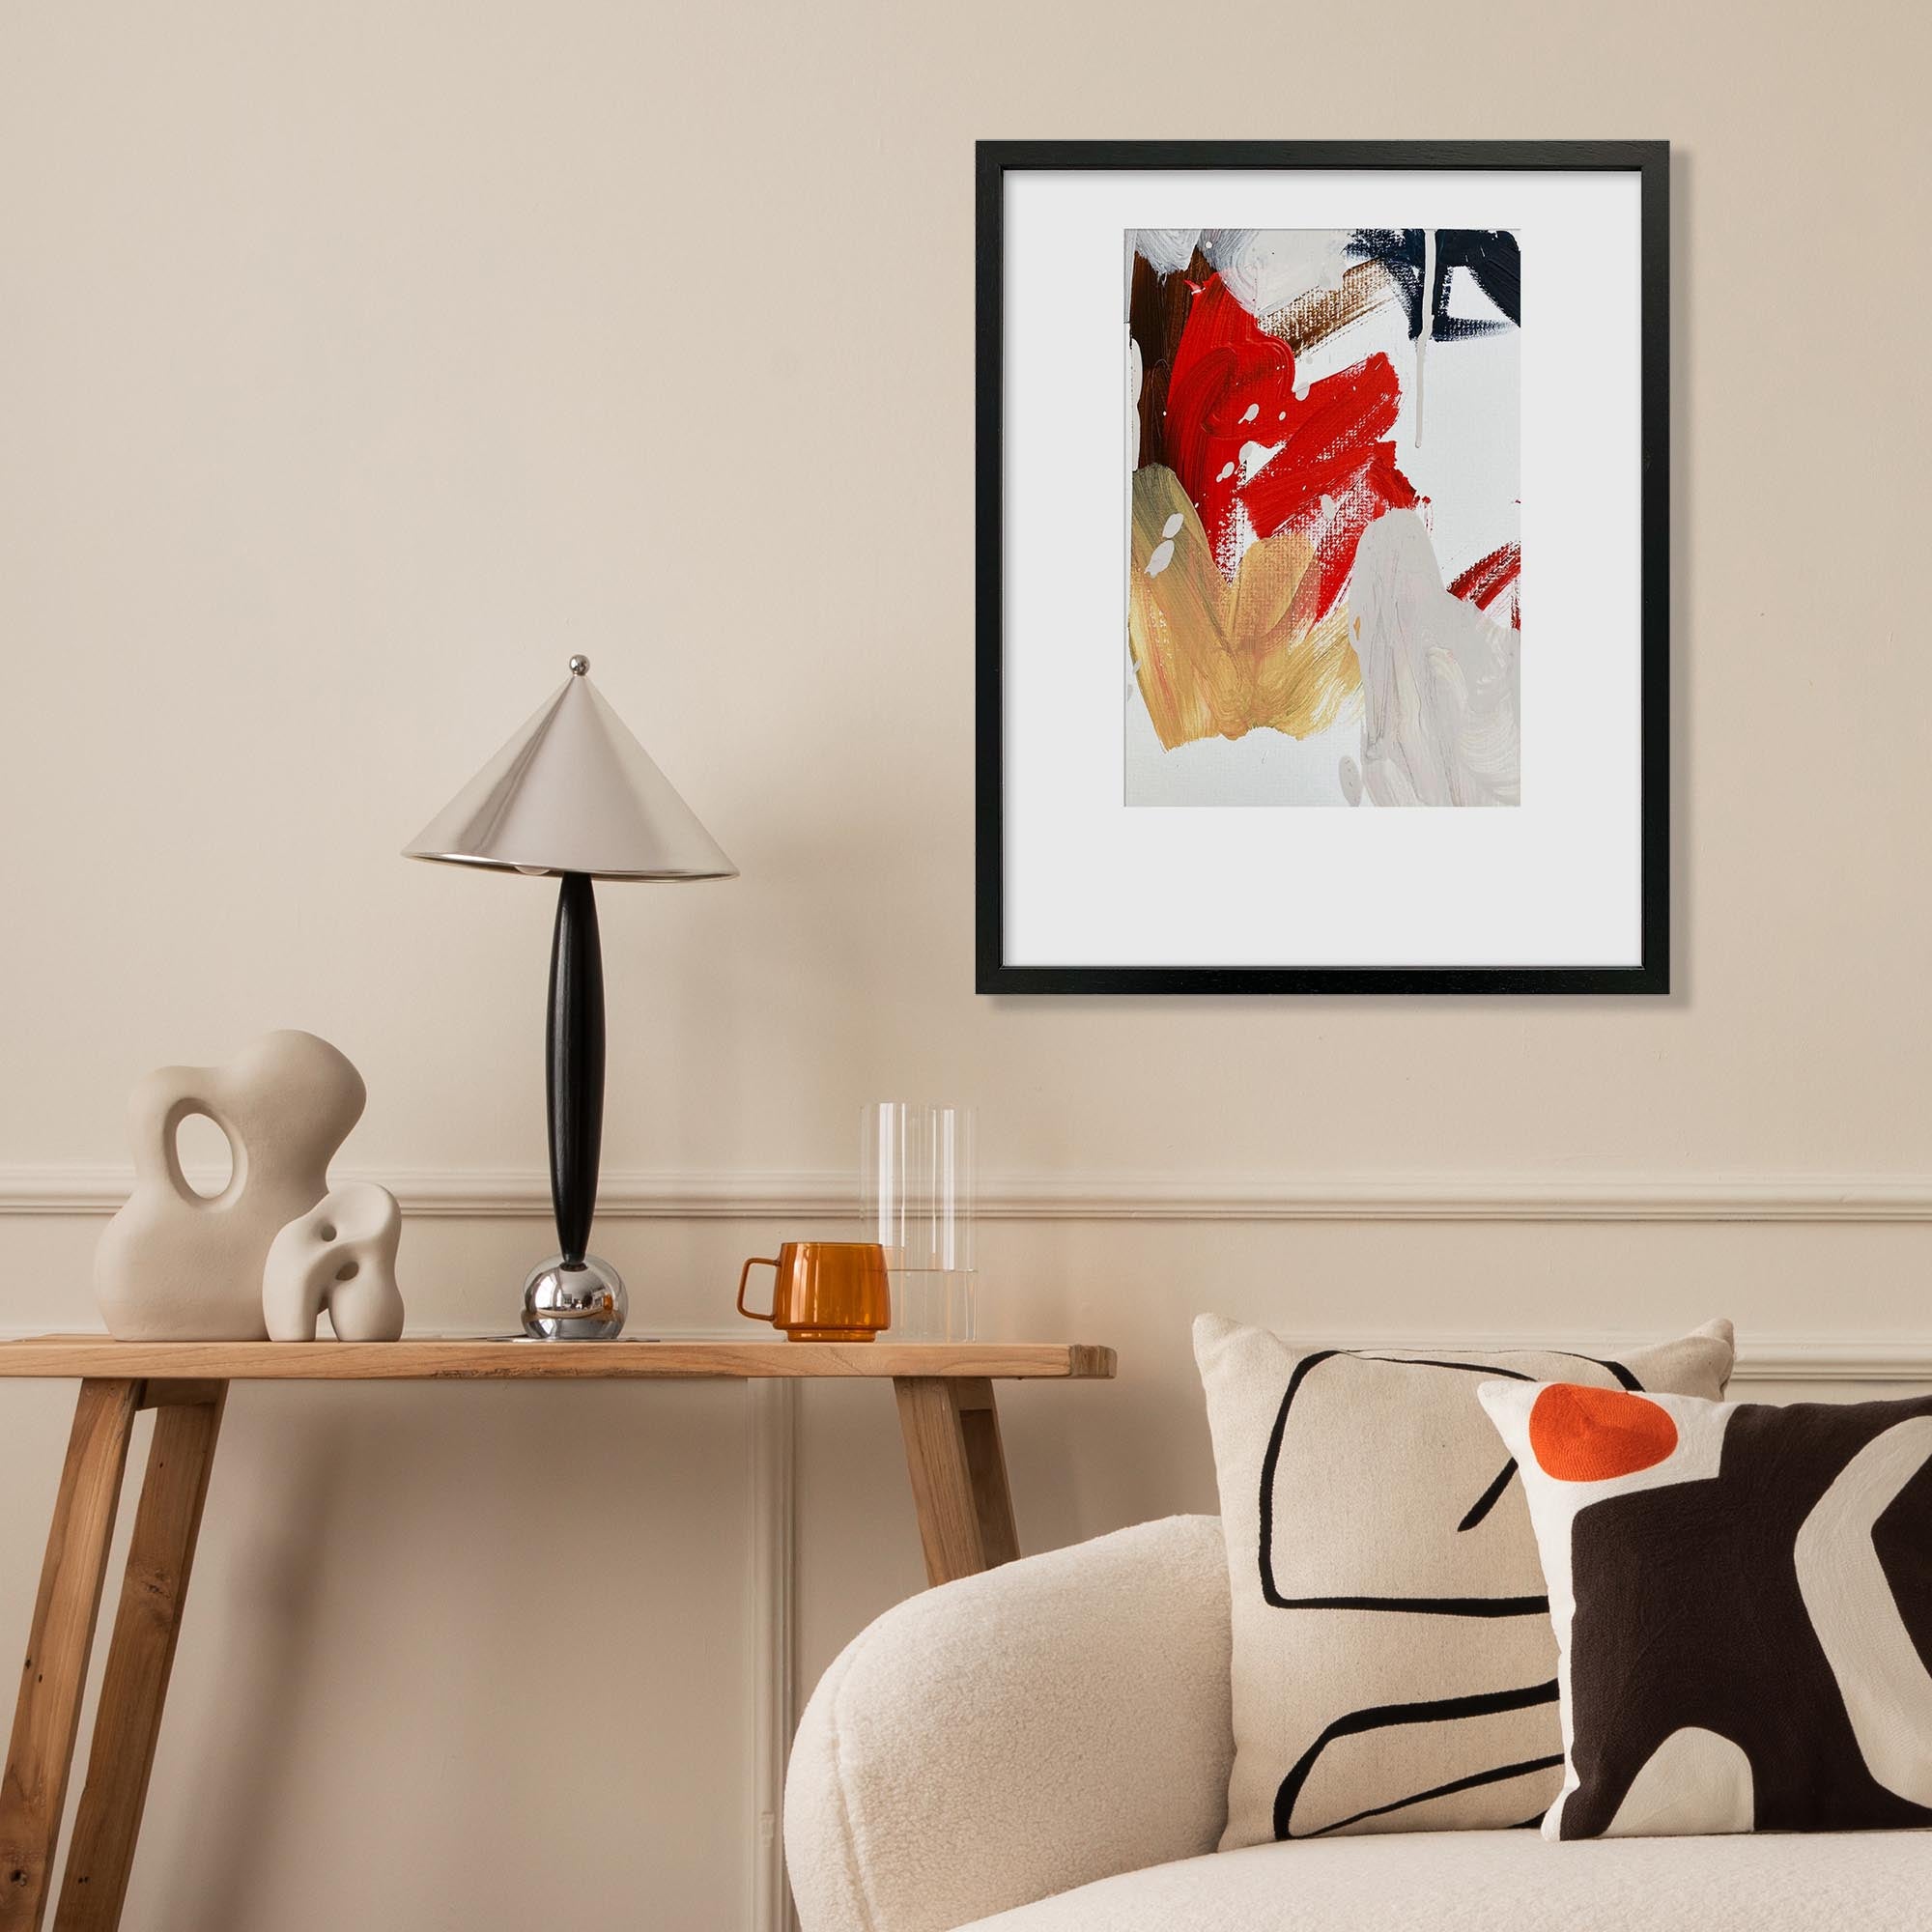 Composition 1 Framed Original Painting-Abstract House